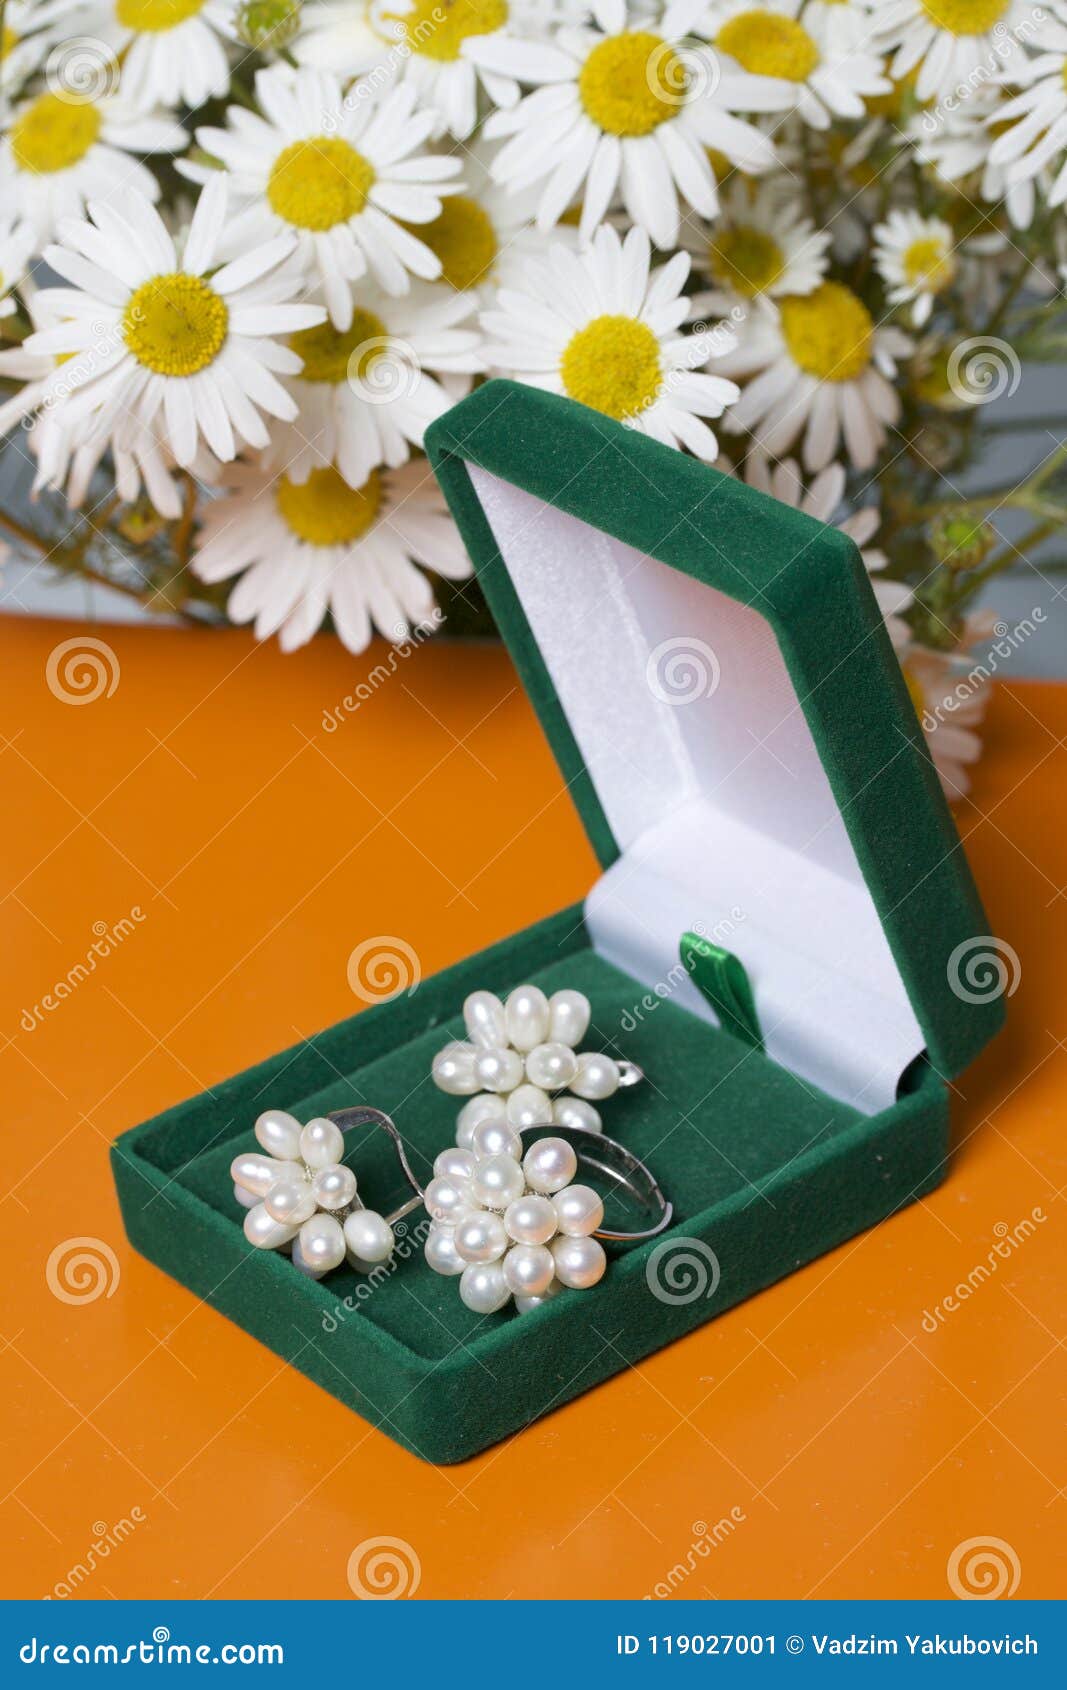 An Open Green Velvet Box for Jewelry. in it Lies a Set: a Ring and ...